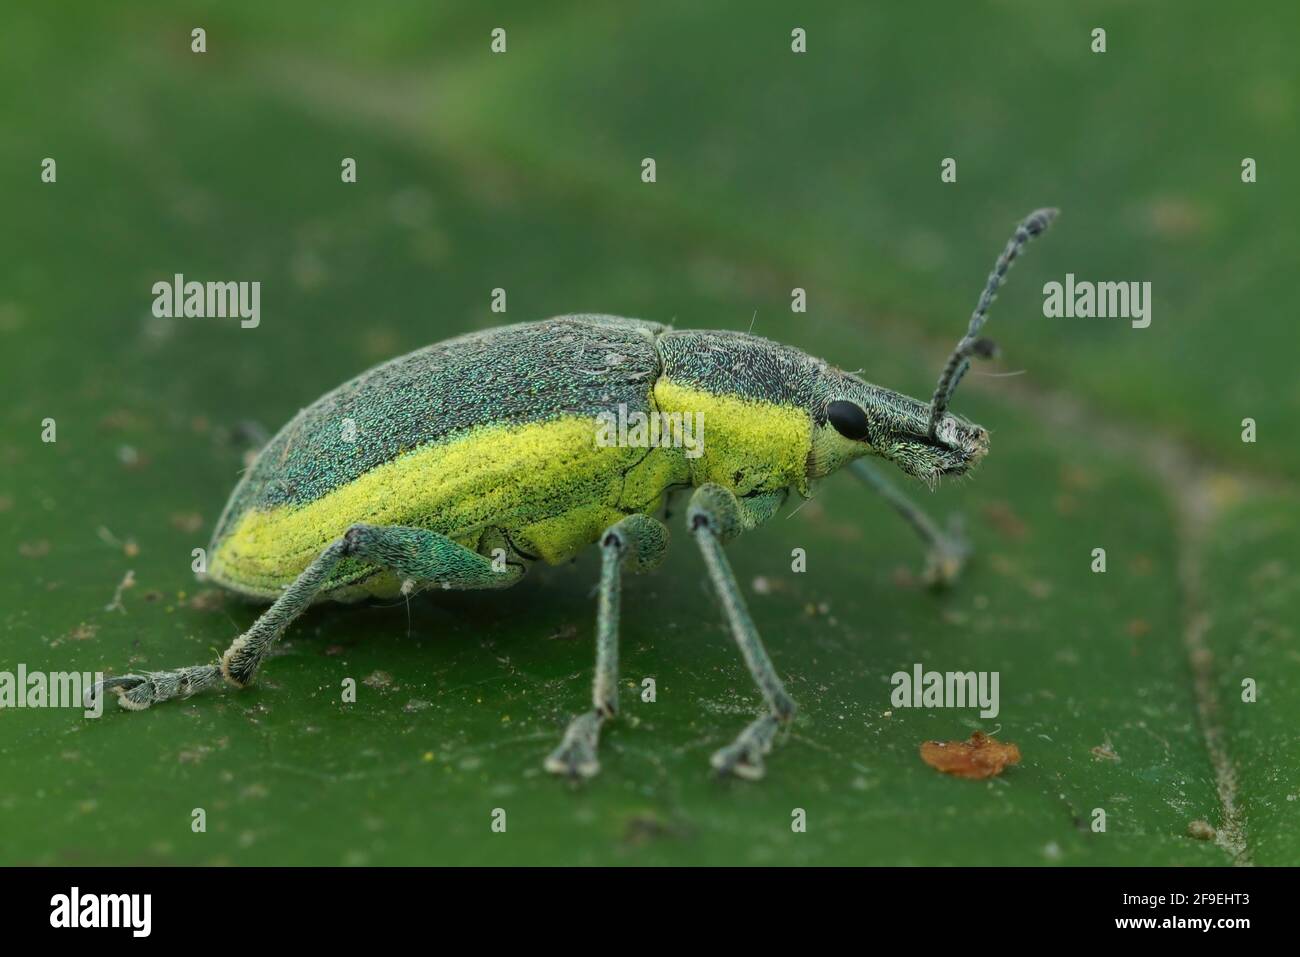 A closeup shot of a green-colored weevil on a green leaf, Chlorophanus viridis Stock Photo